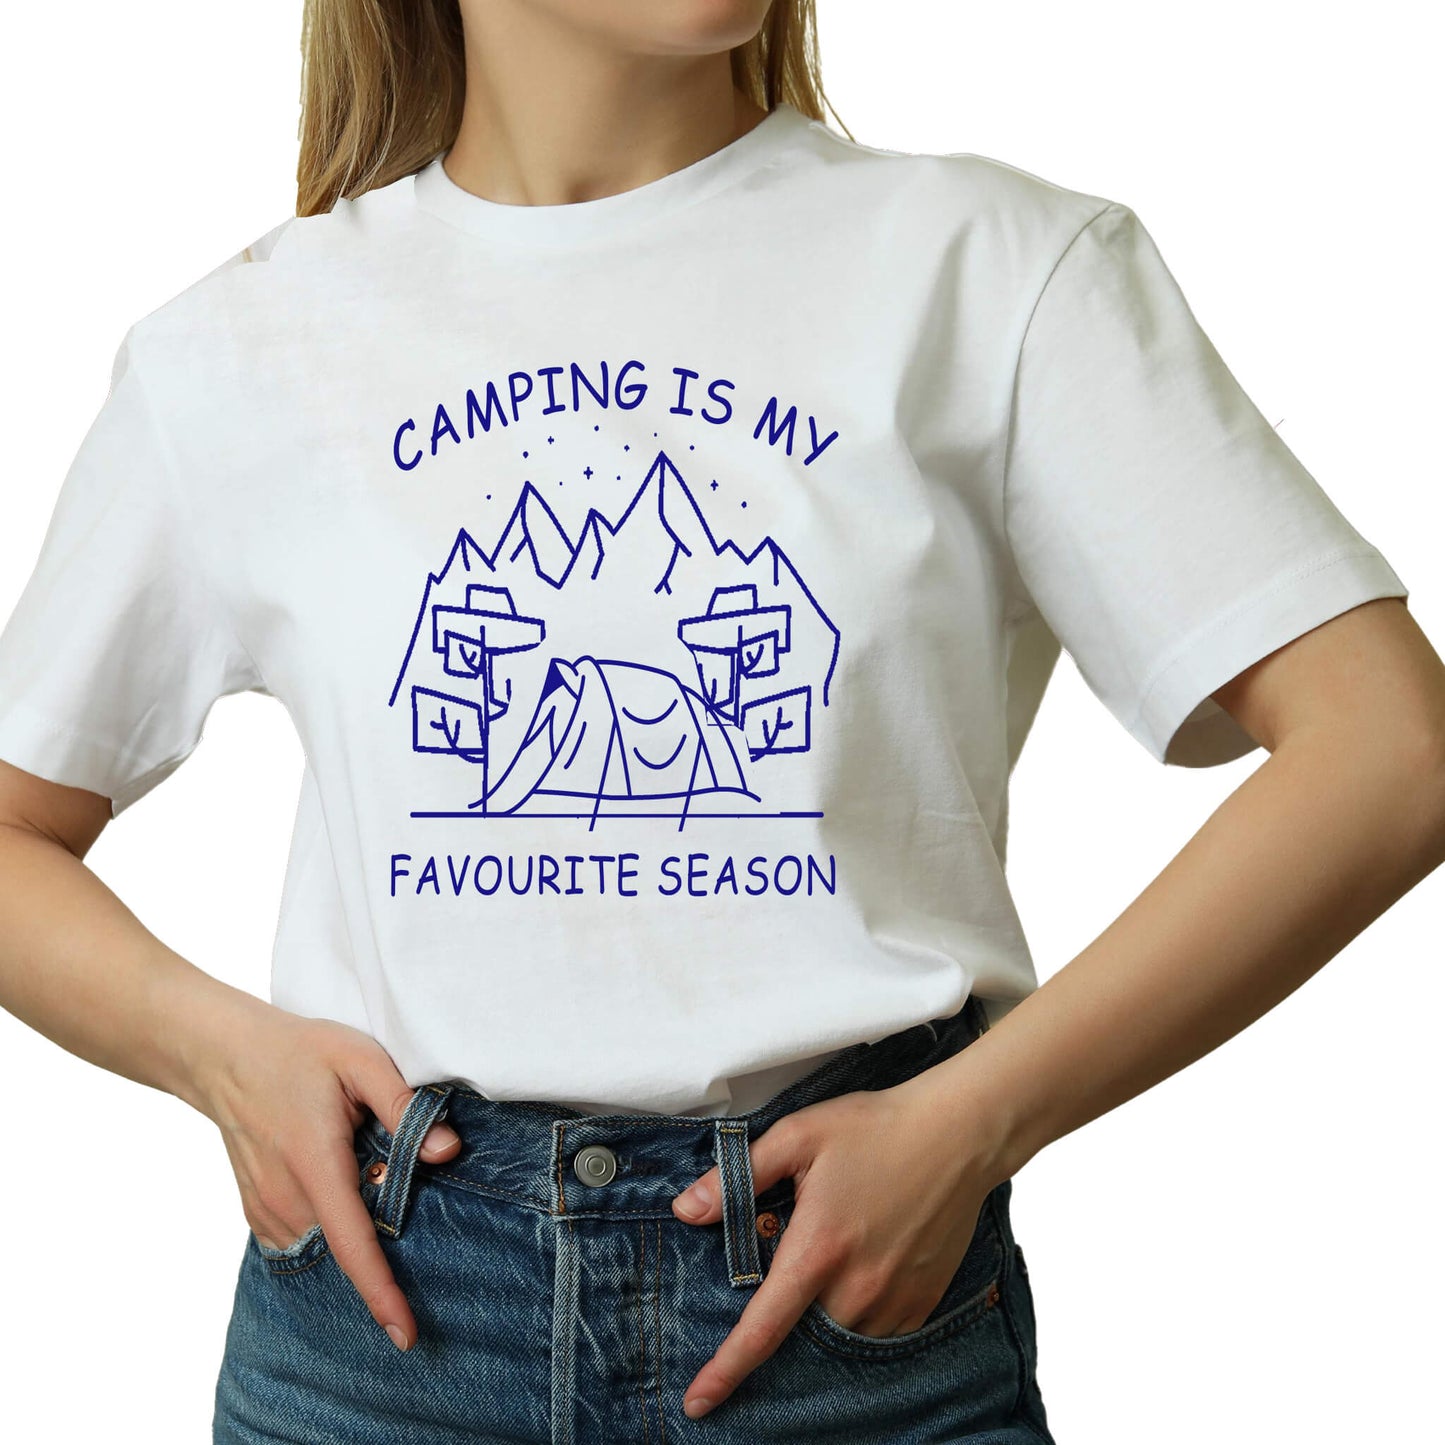  "White Graphic tee with an illustration of a tent, surrounded by nature. Text reads: 'Camping is my favorite season.' Celebrate the great outdoors!"